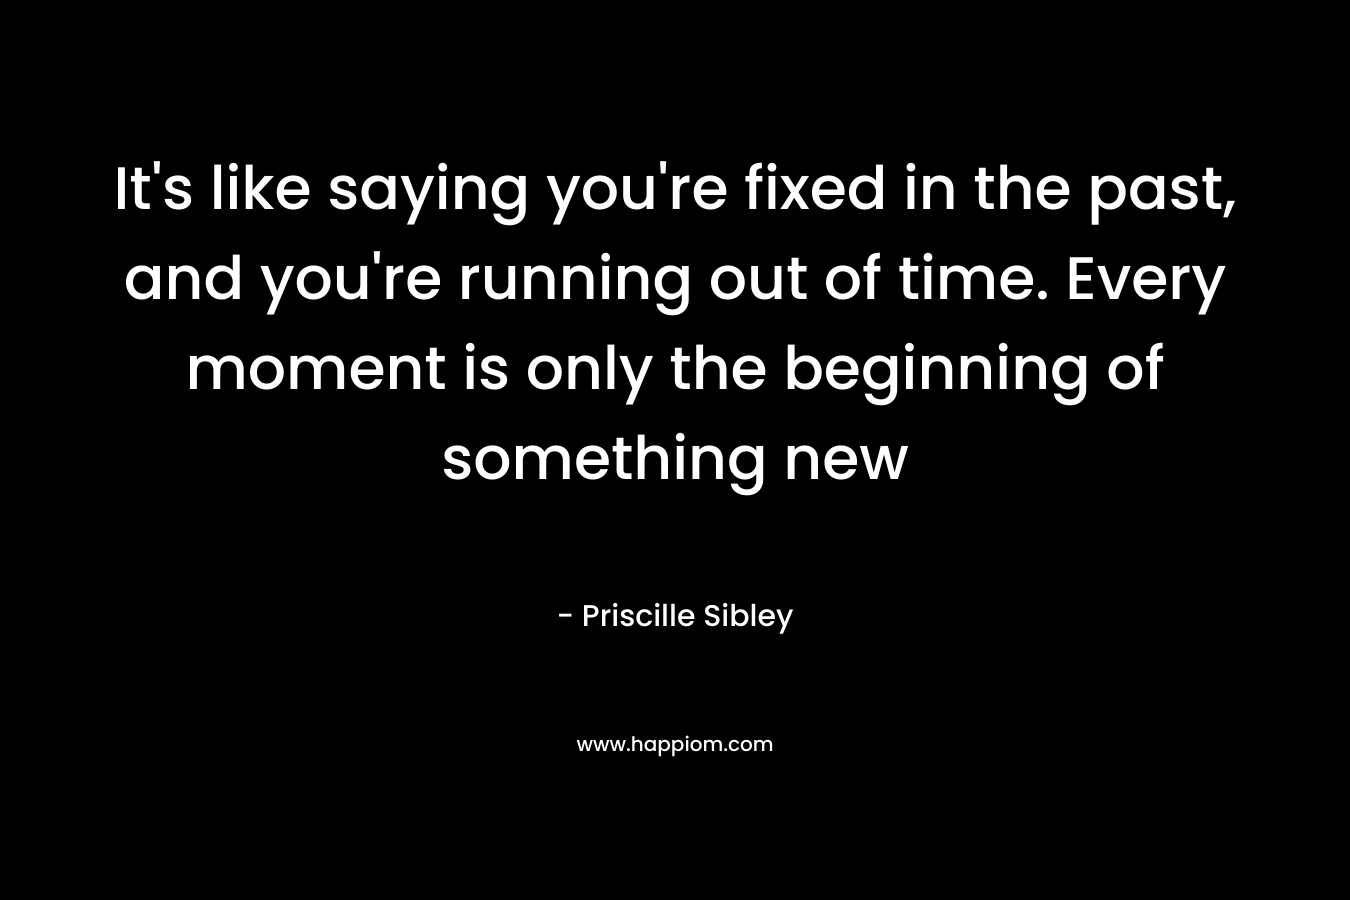 It’s like saying you’re fixed in the past, and you’re running out of time. Every moment is only the beginning of something new – Priscille Sibley